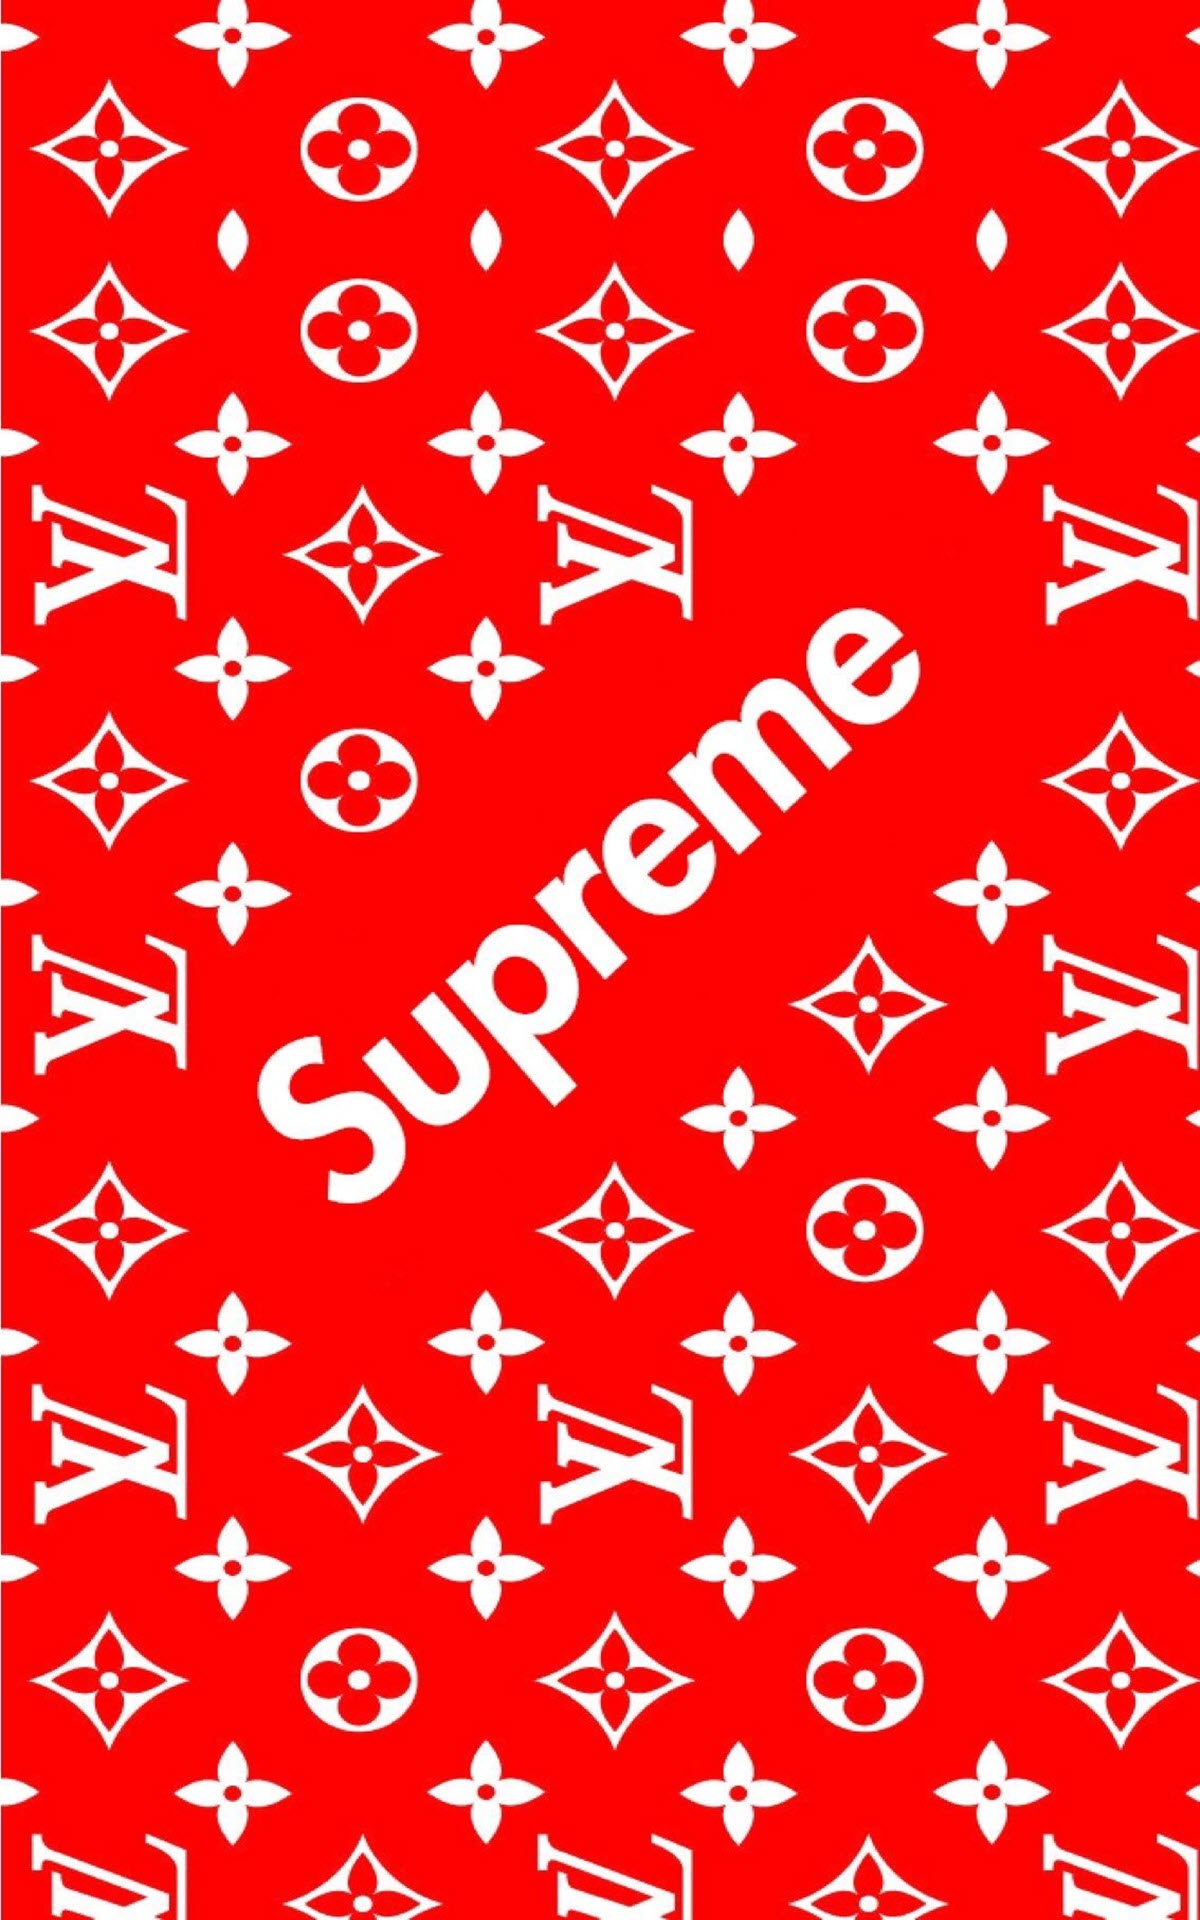 Supreme wallpaper collection for mobile | Cool Wallpapers - heroscreen.cc |  Supreme iphone wallpaper, Hypebeast iphone wallpaper, Supreme wallpaper